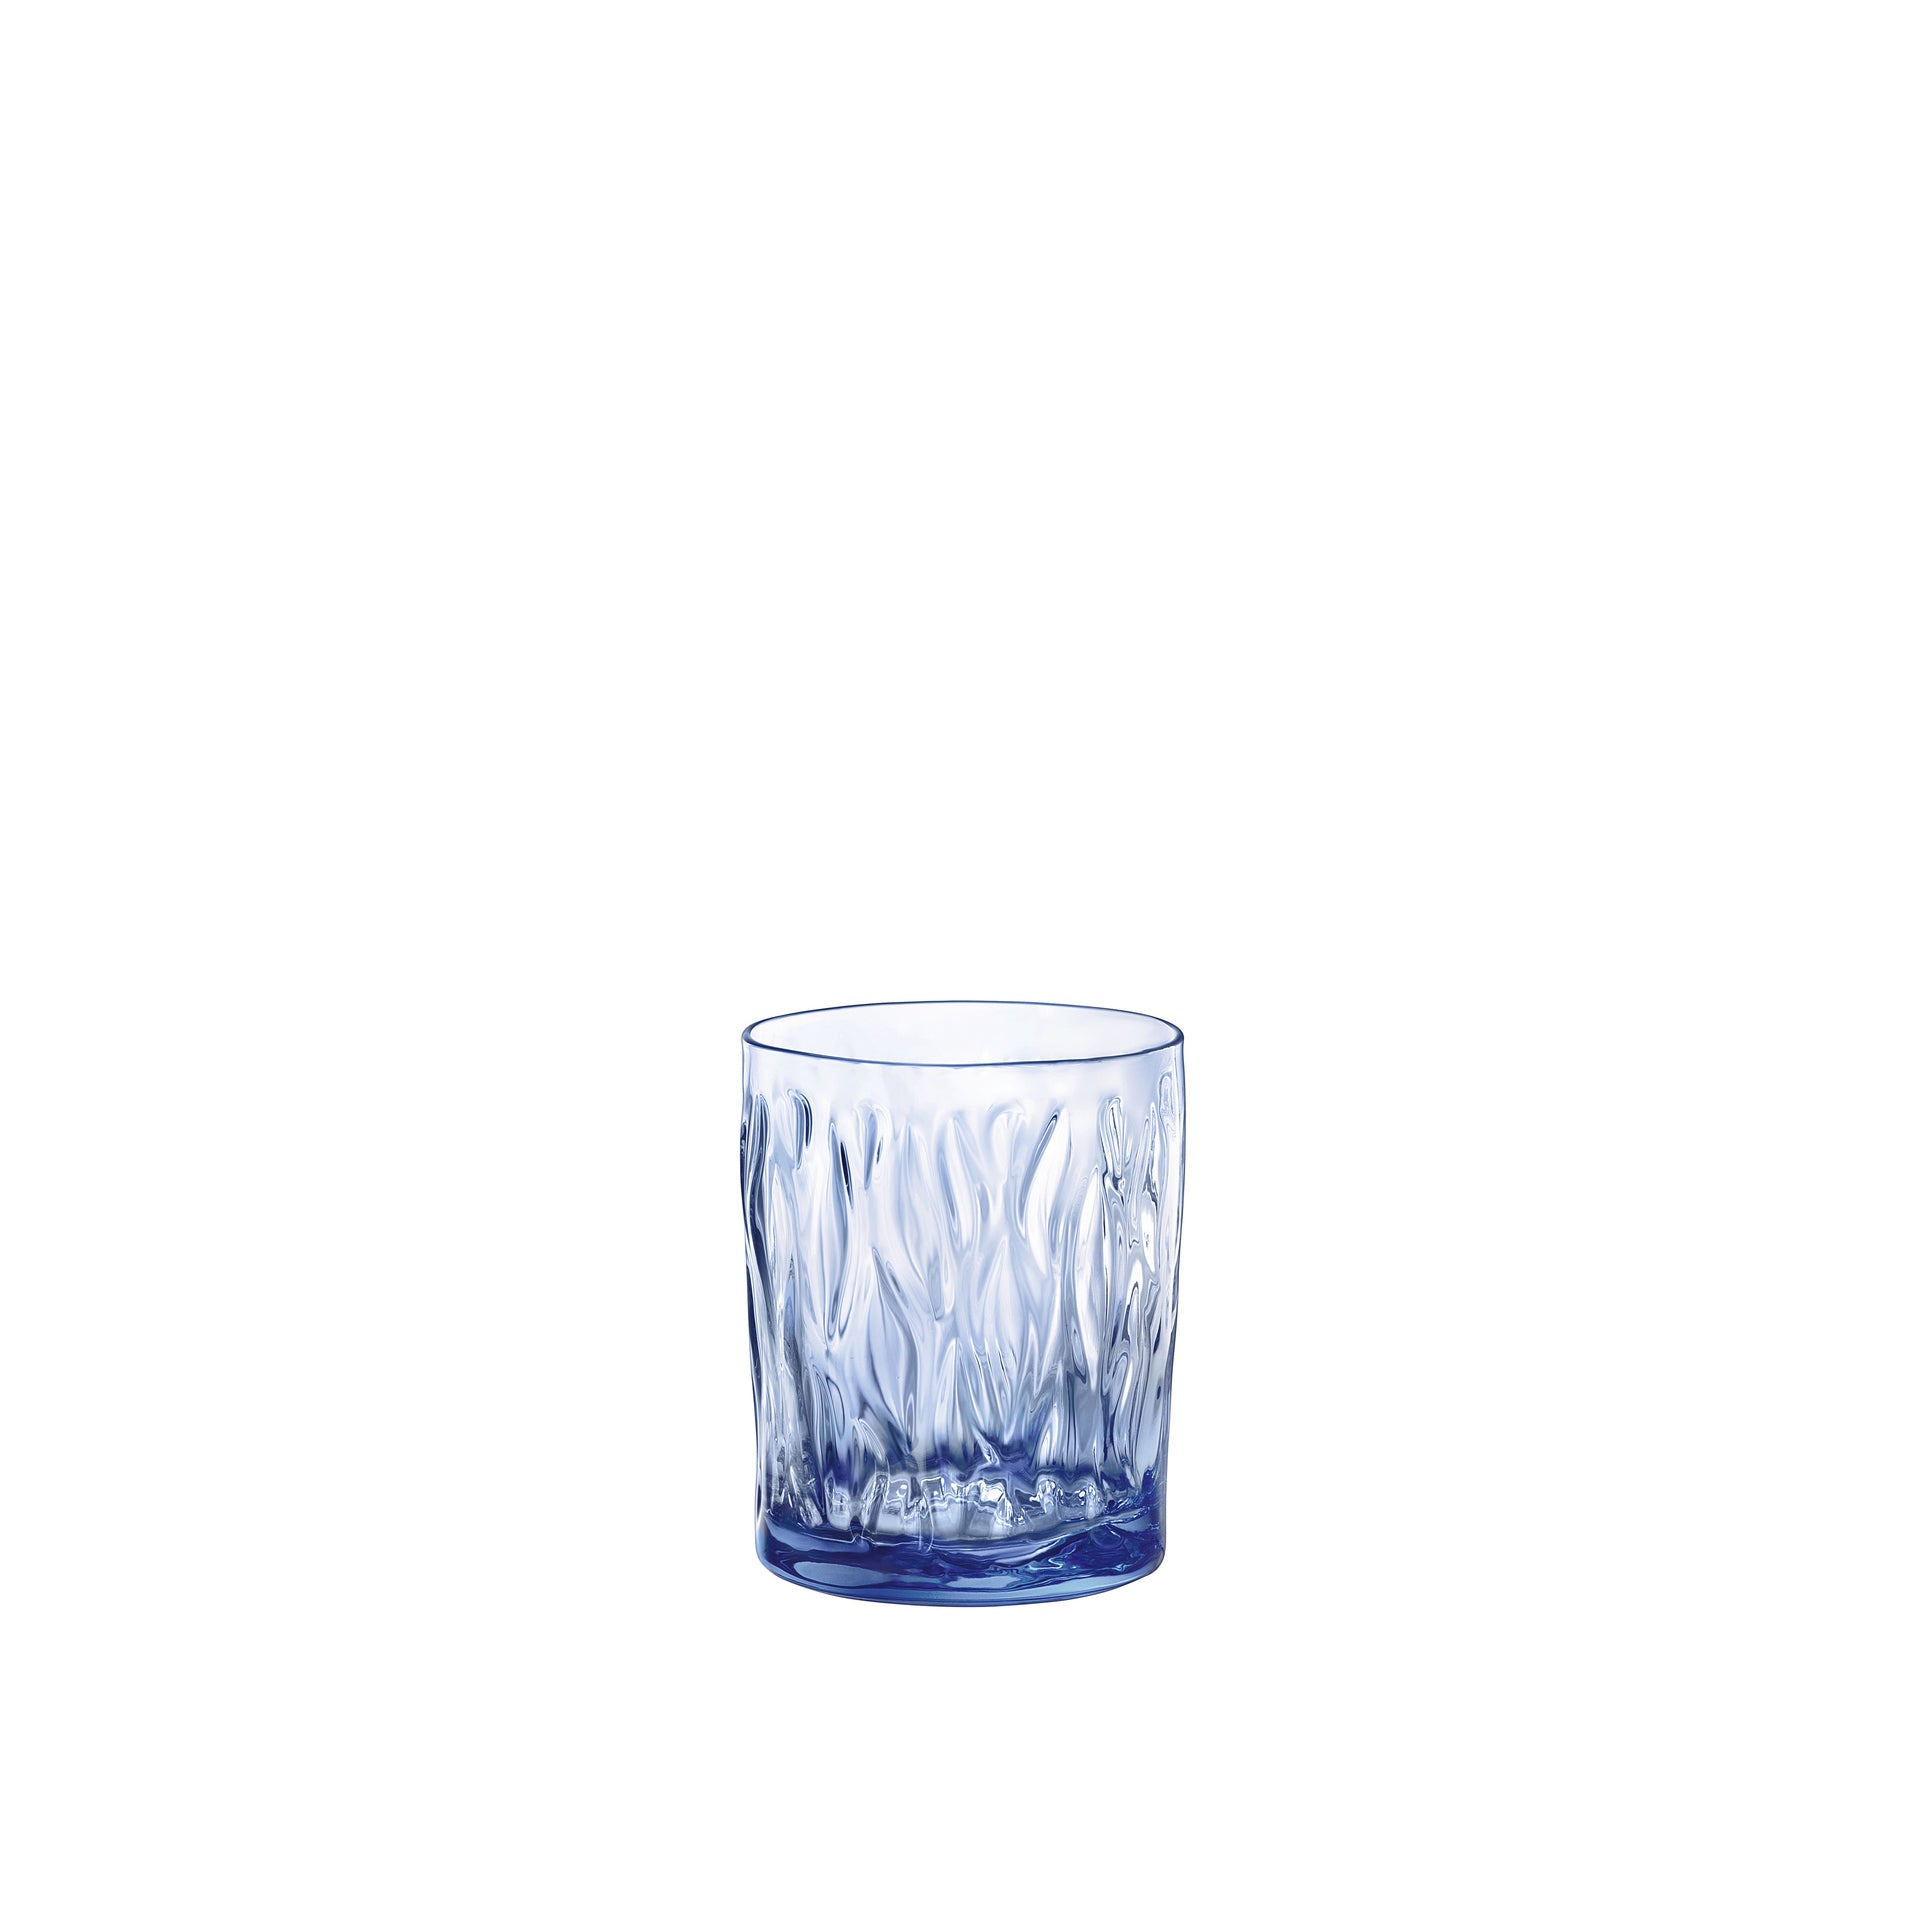 Wind 10.25 oz. Water Drinking Glasses (Set of 6)